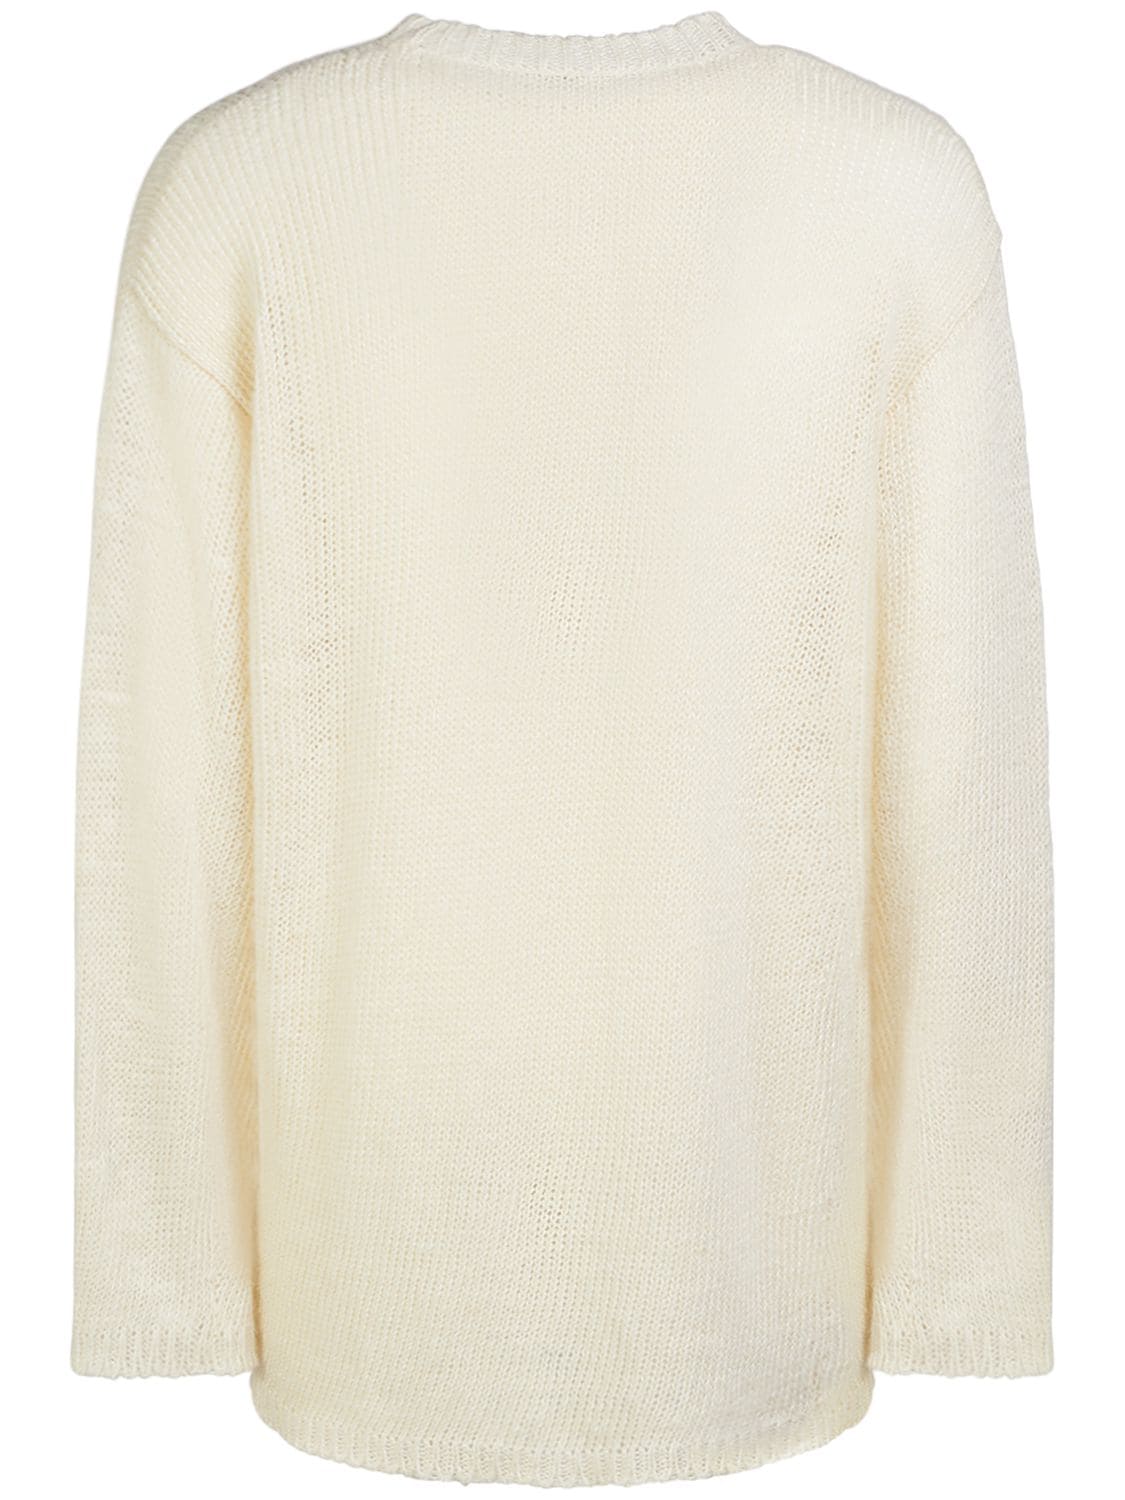 Shop The Row Hank Linen Crewneck Sweater In Off White